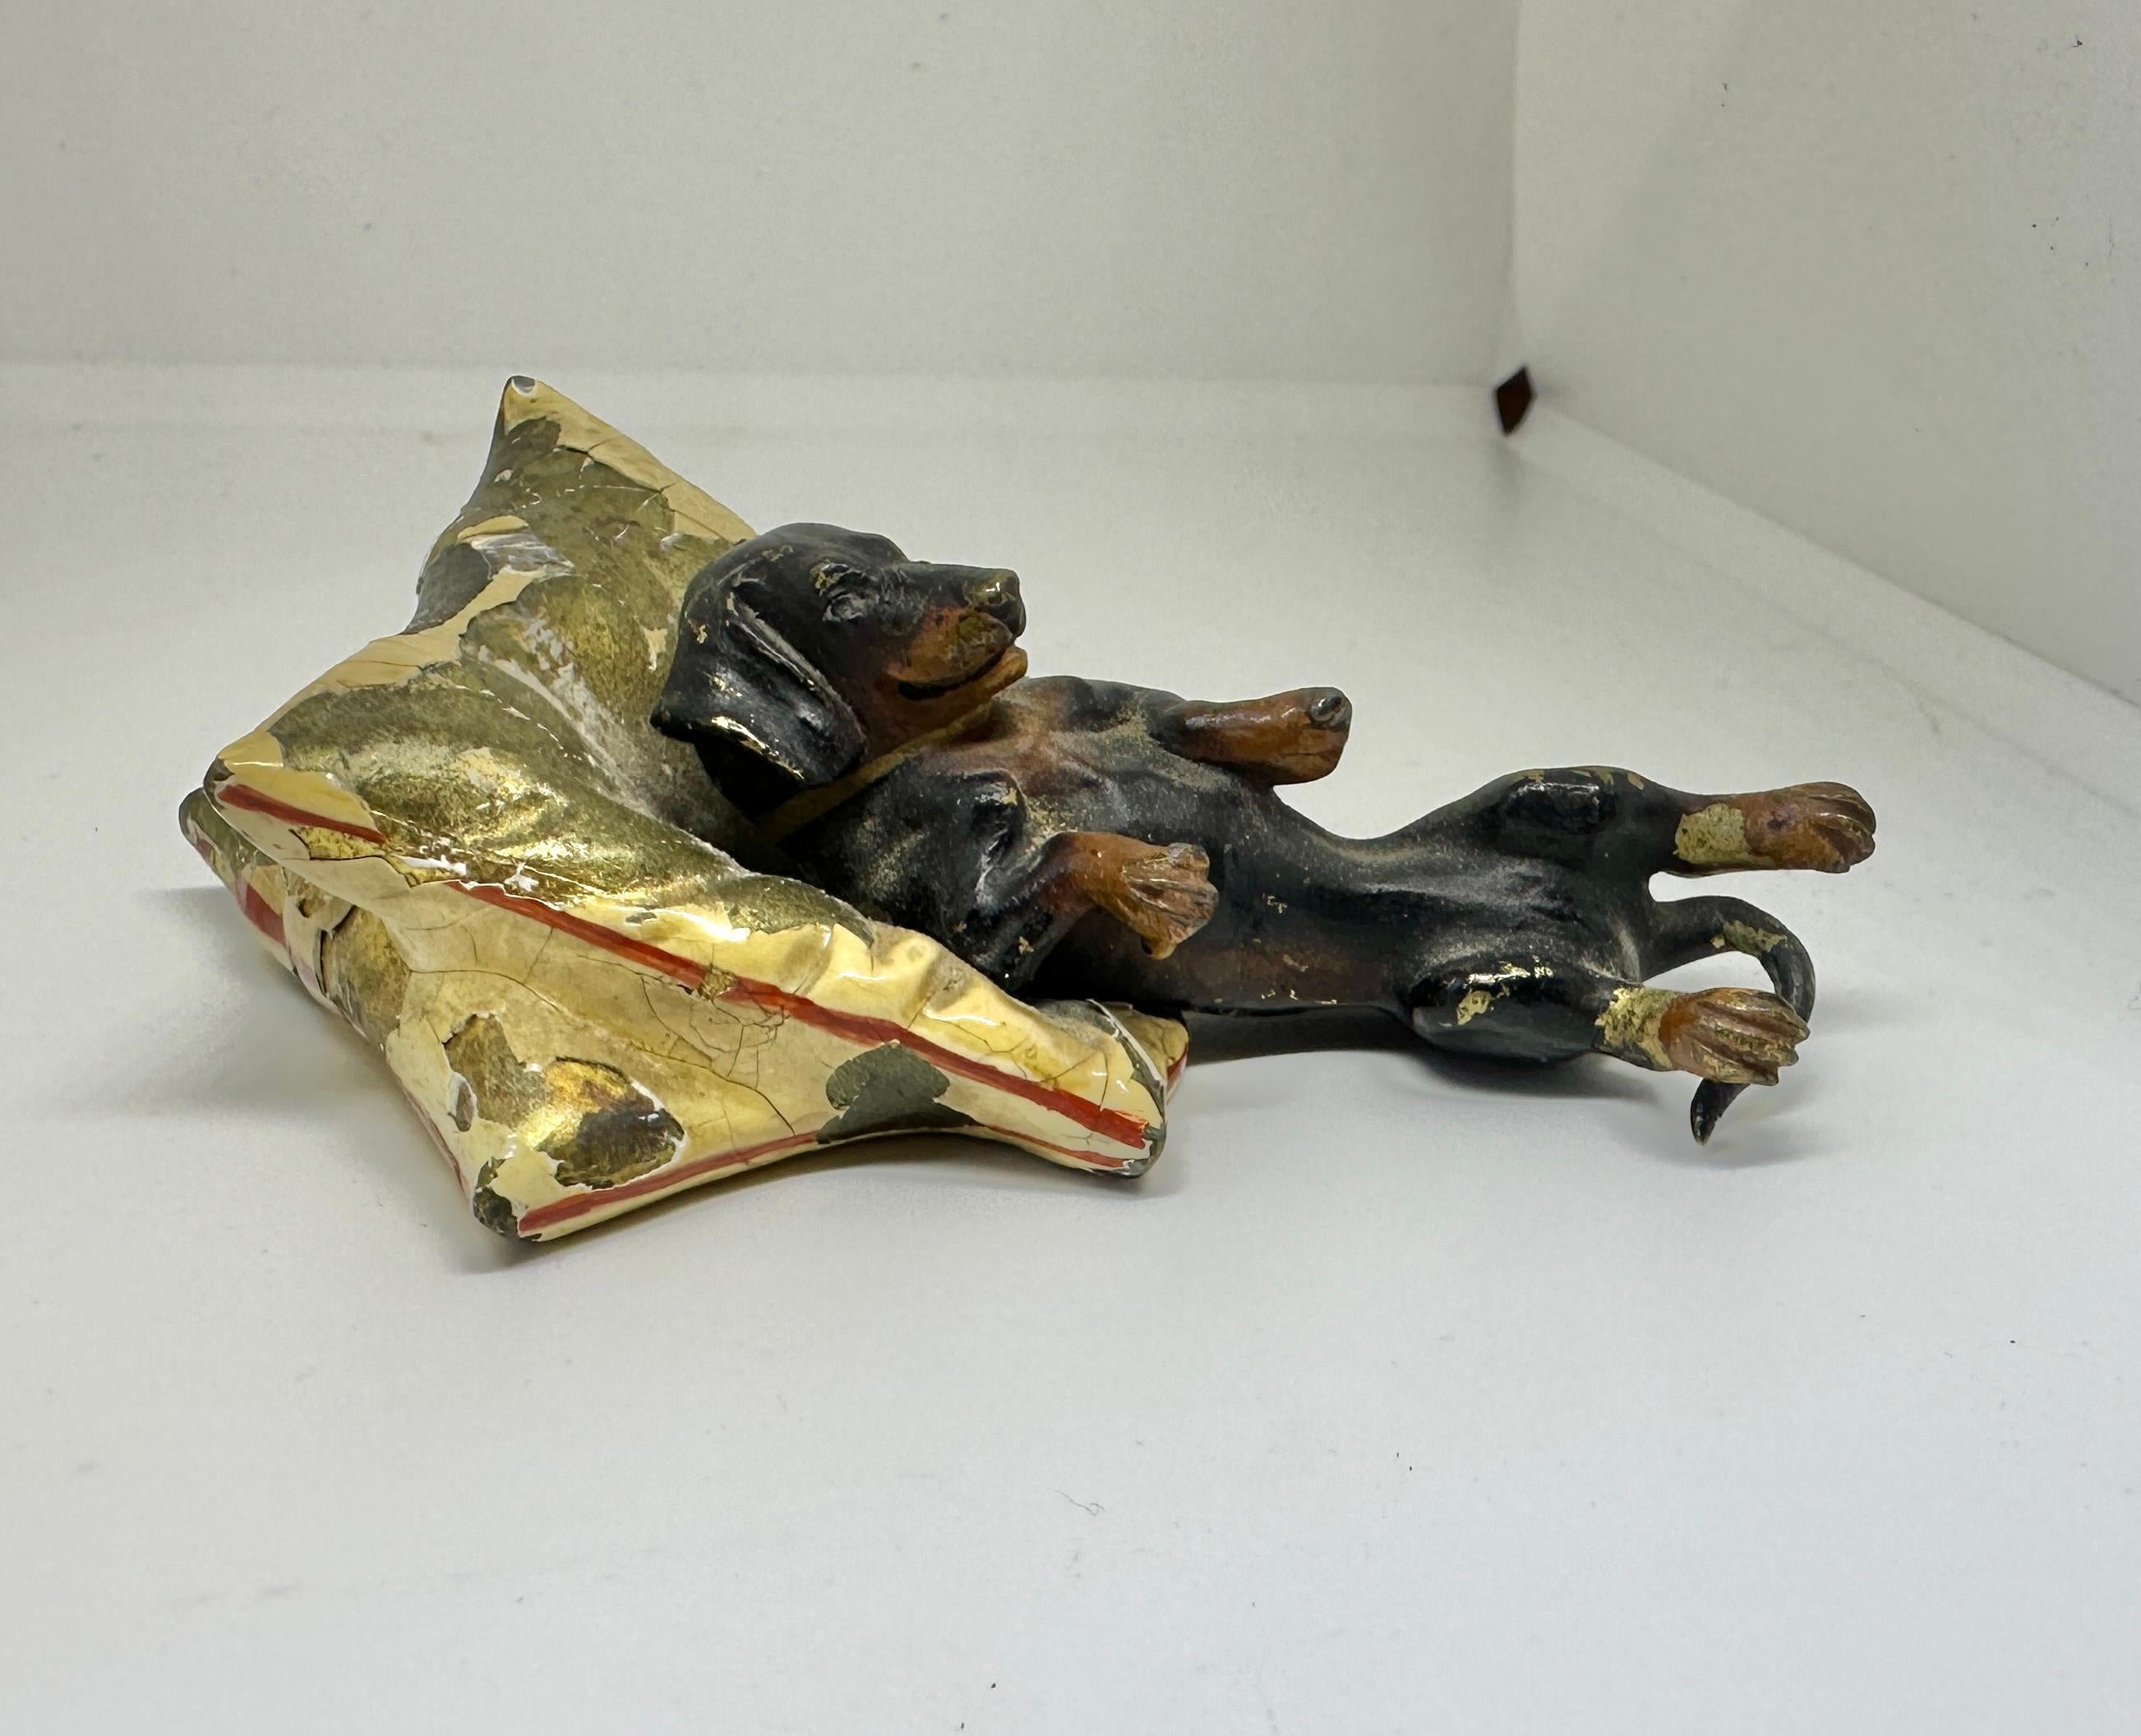 THIS IS A SUPERB ANTIQUE AUSTRIAN VIENNA BRONZE OF AN ADORABLE DACHSHUND DOG LYING ON A PILLOW.
This wonderful antique Austrian Vienna Bronze (Bronze de Vienne, Wiener Bronze, Cold Painted Bronze) dates to circa 1900-1930.  The bronze is very